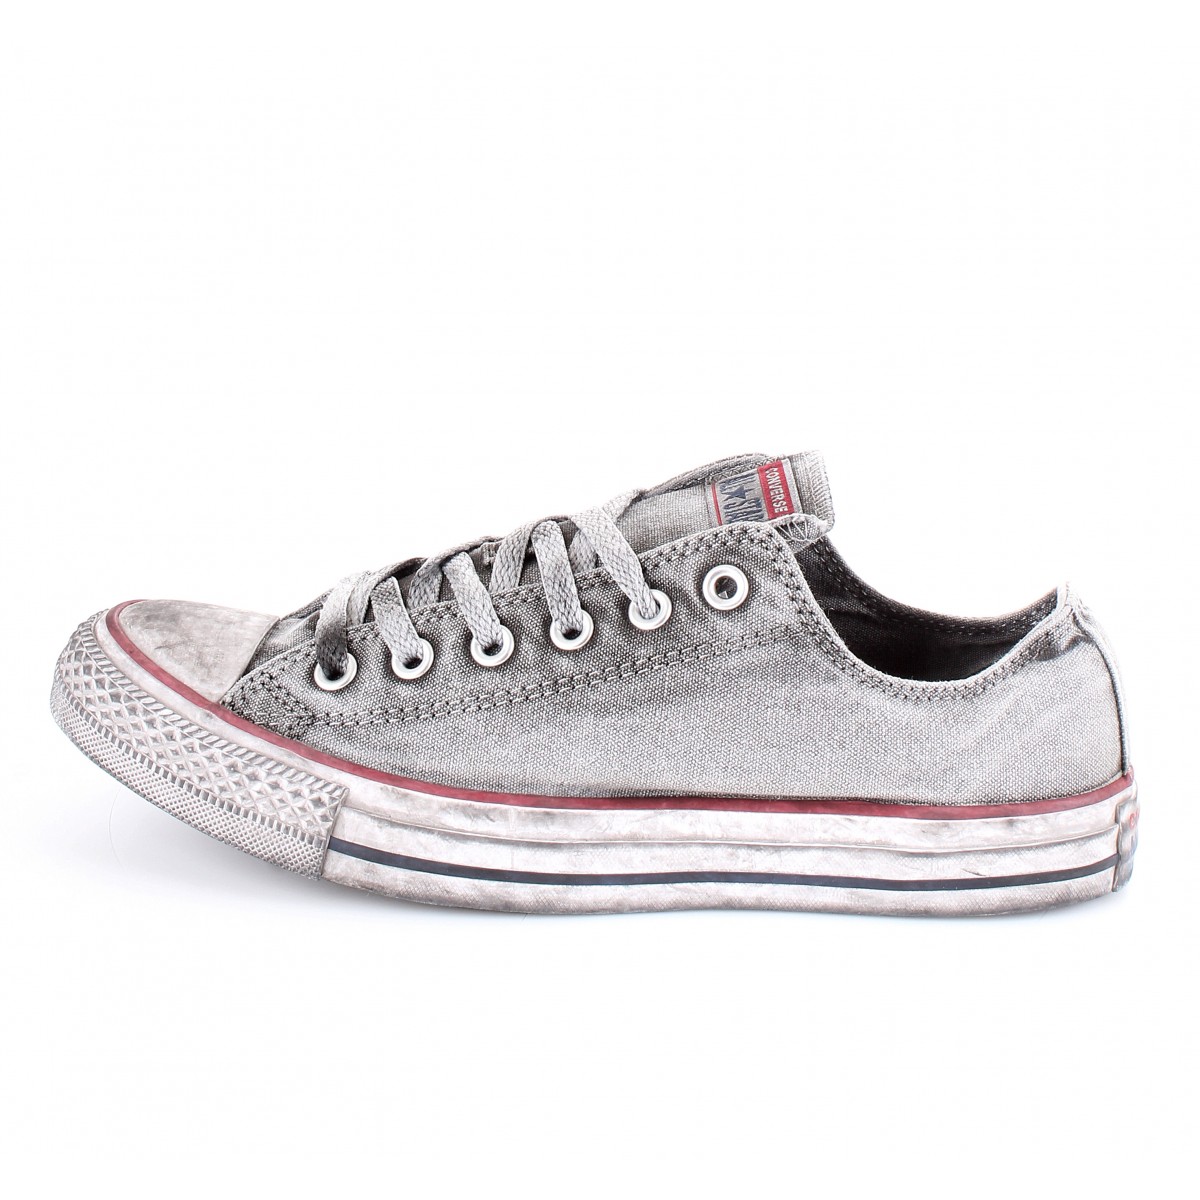 converse all star limited edition basse